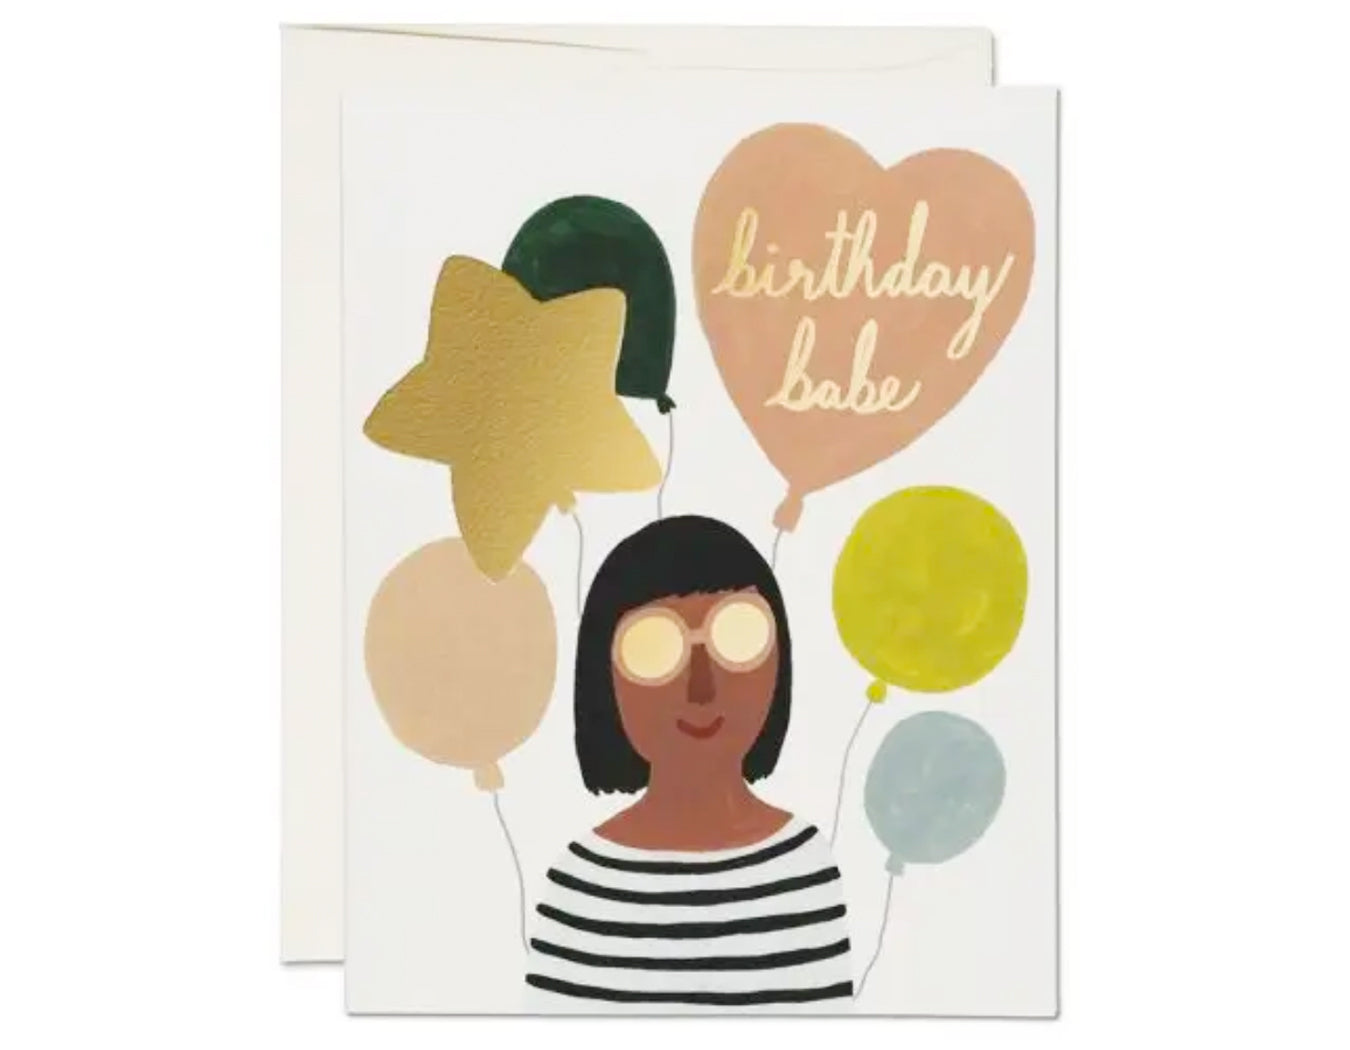 woman with short black hair and bangs and ballons. heart shaped balloon says birthday babe in cursive.